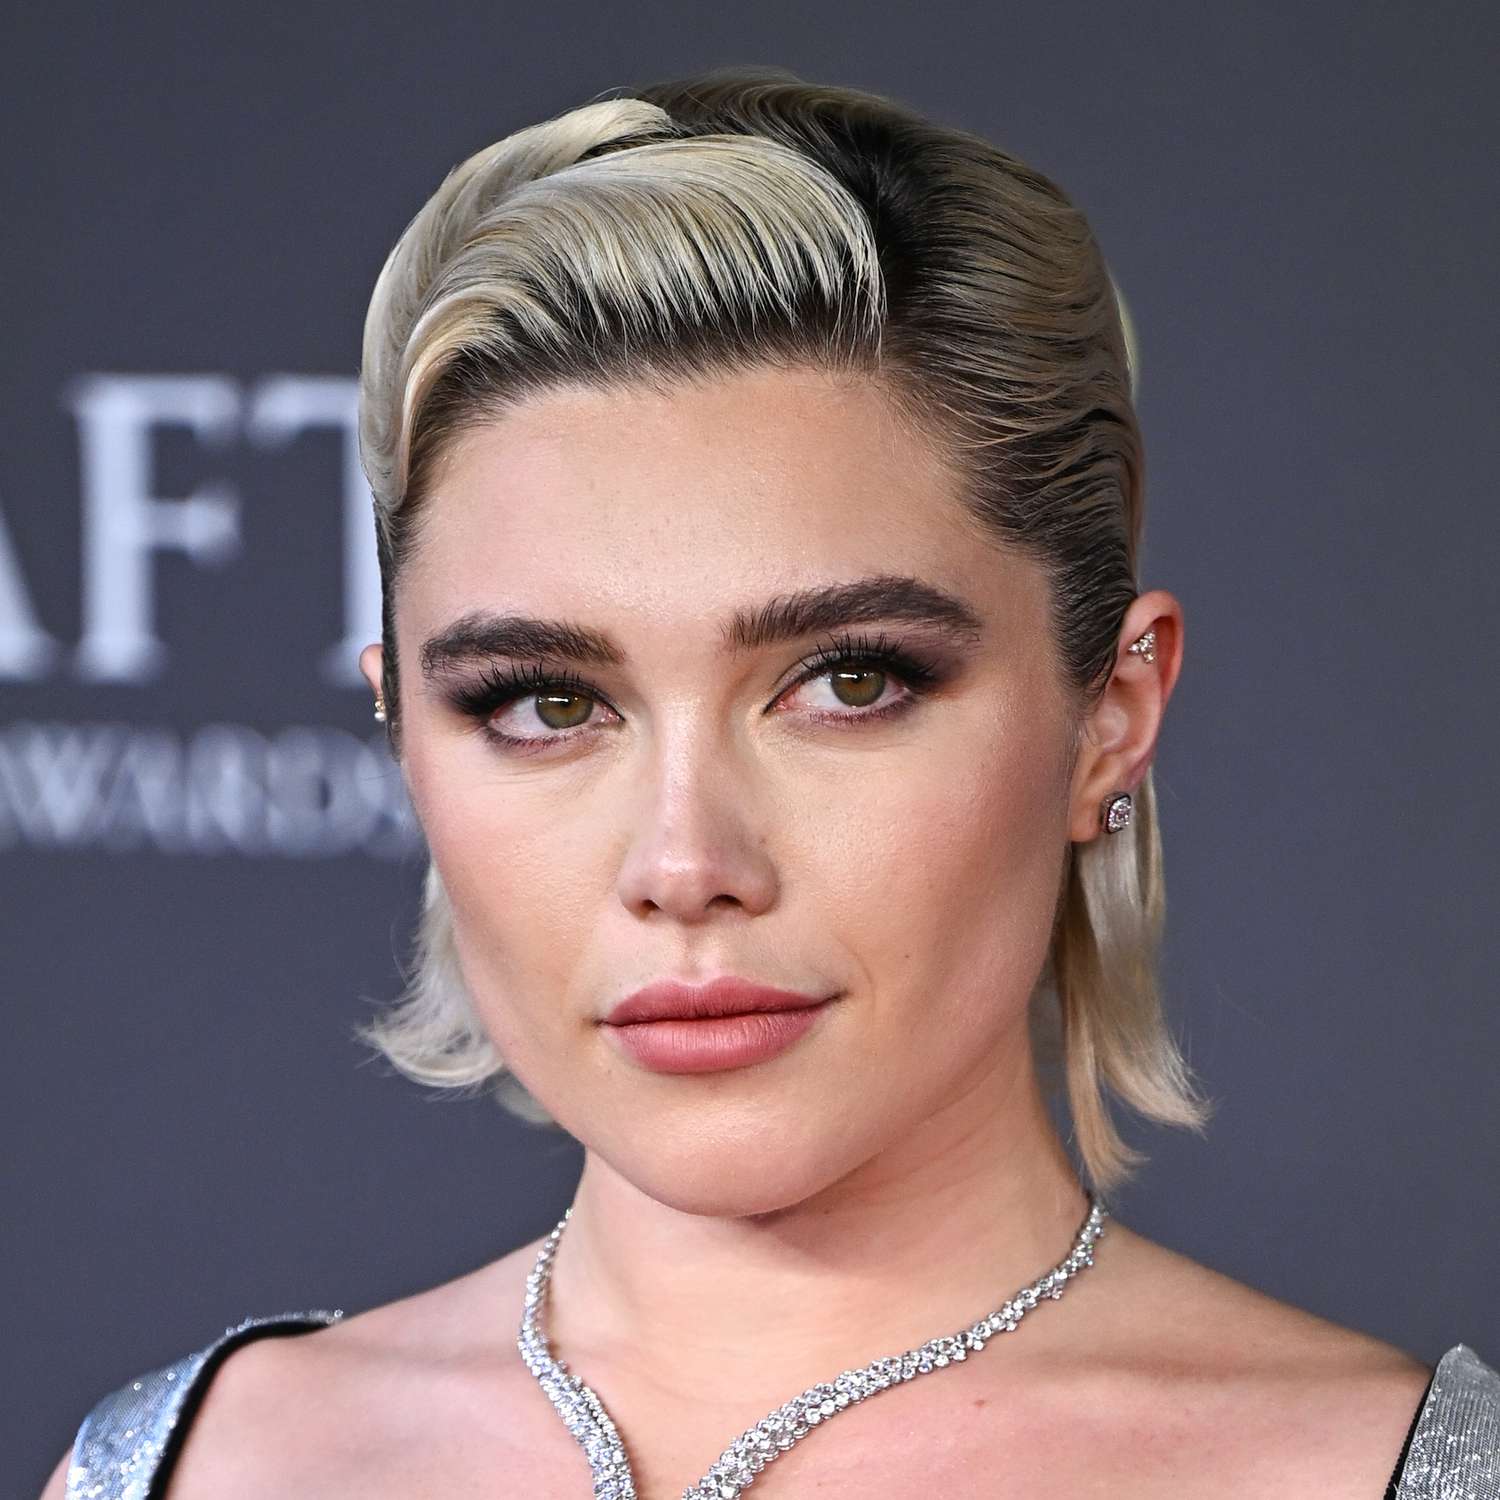 Florence Pugh attends the BAFTA Awards with a firm finger wave design in her long bob